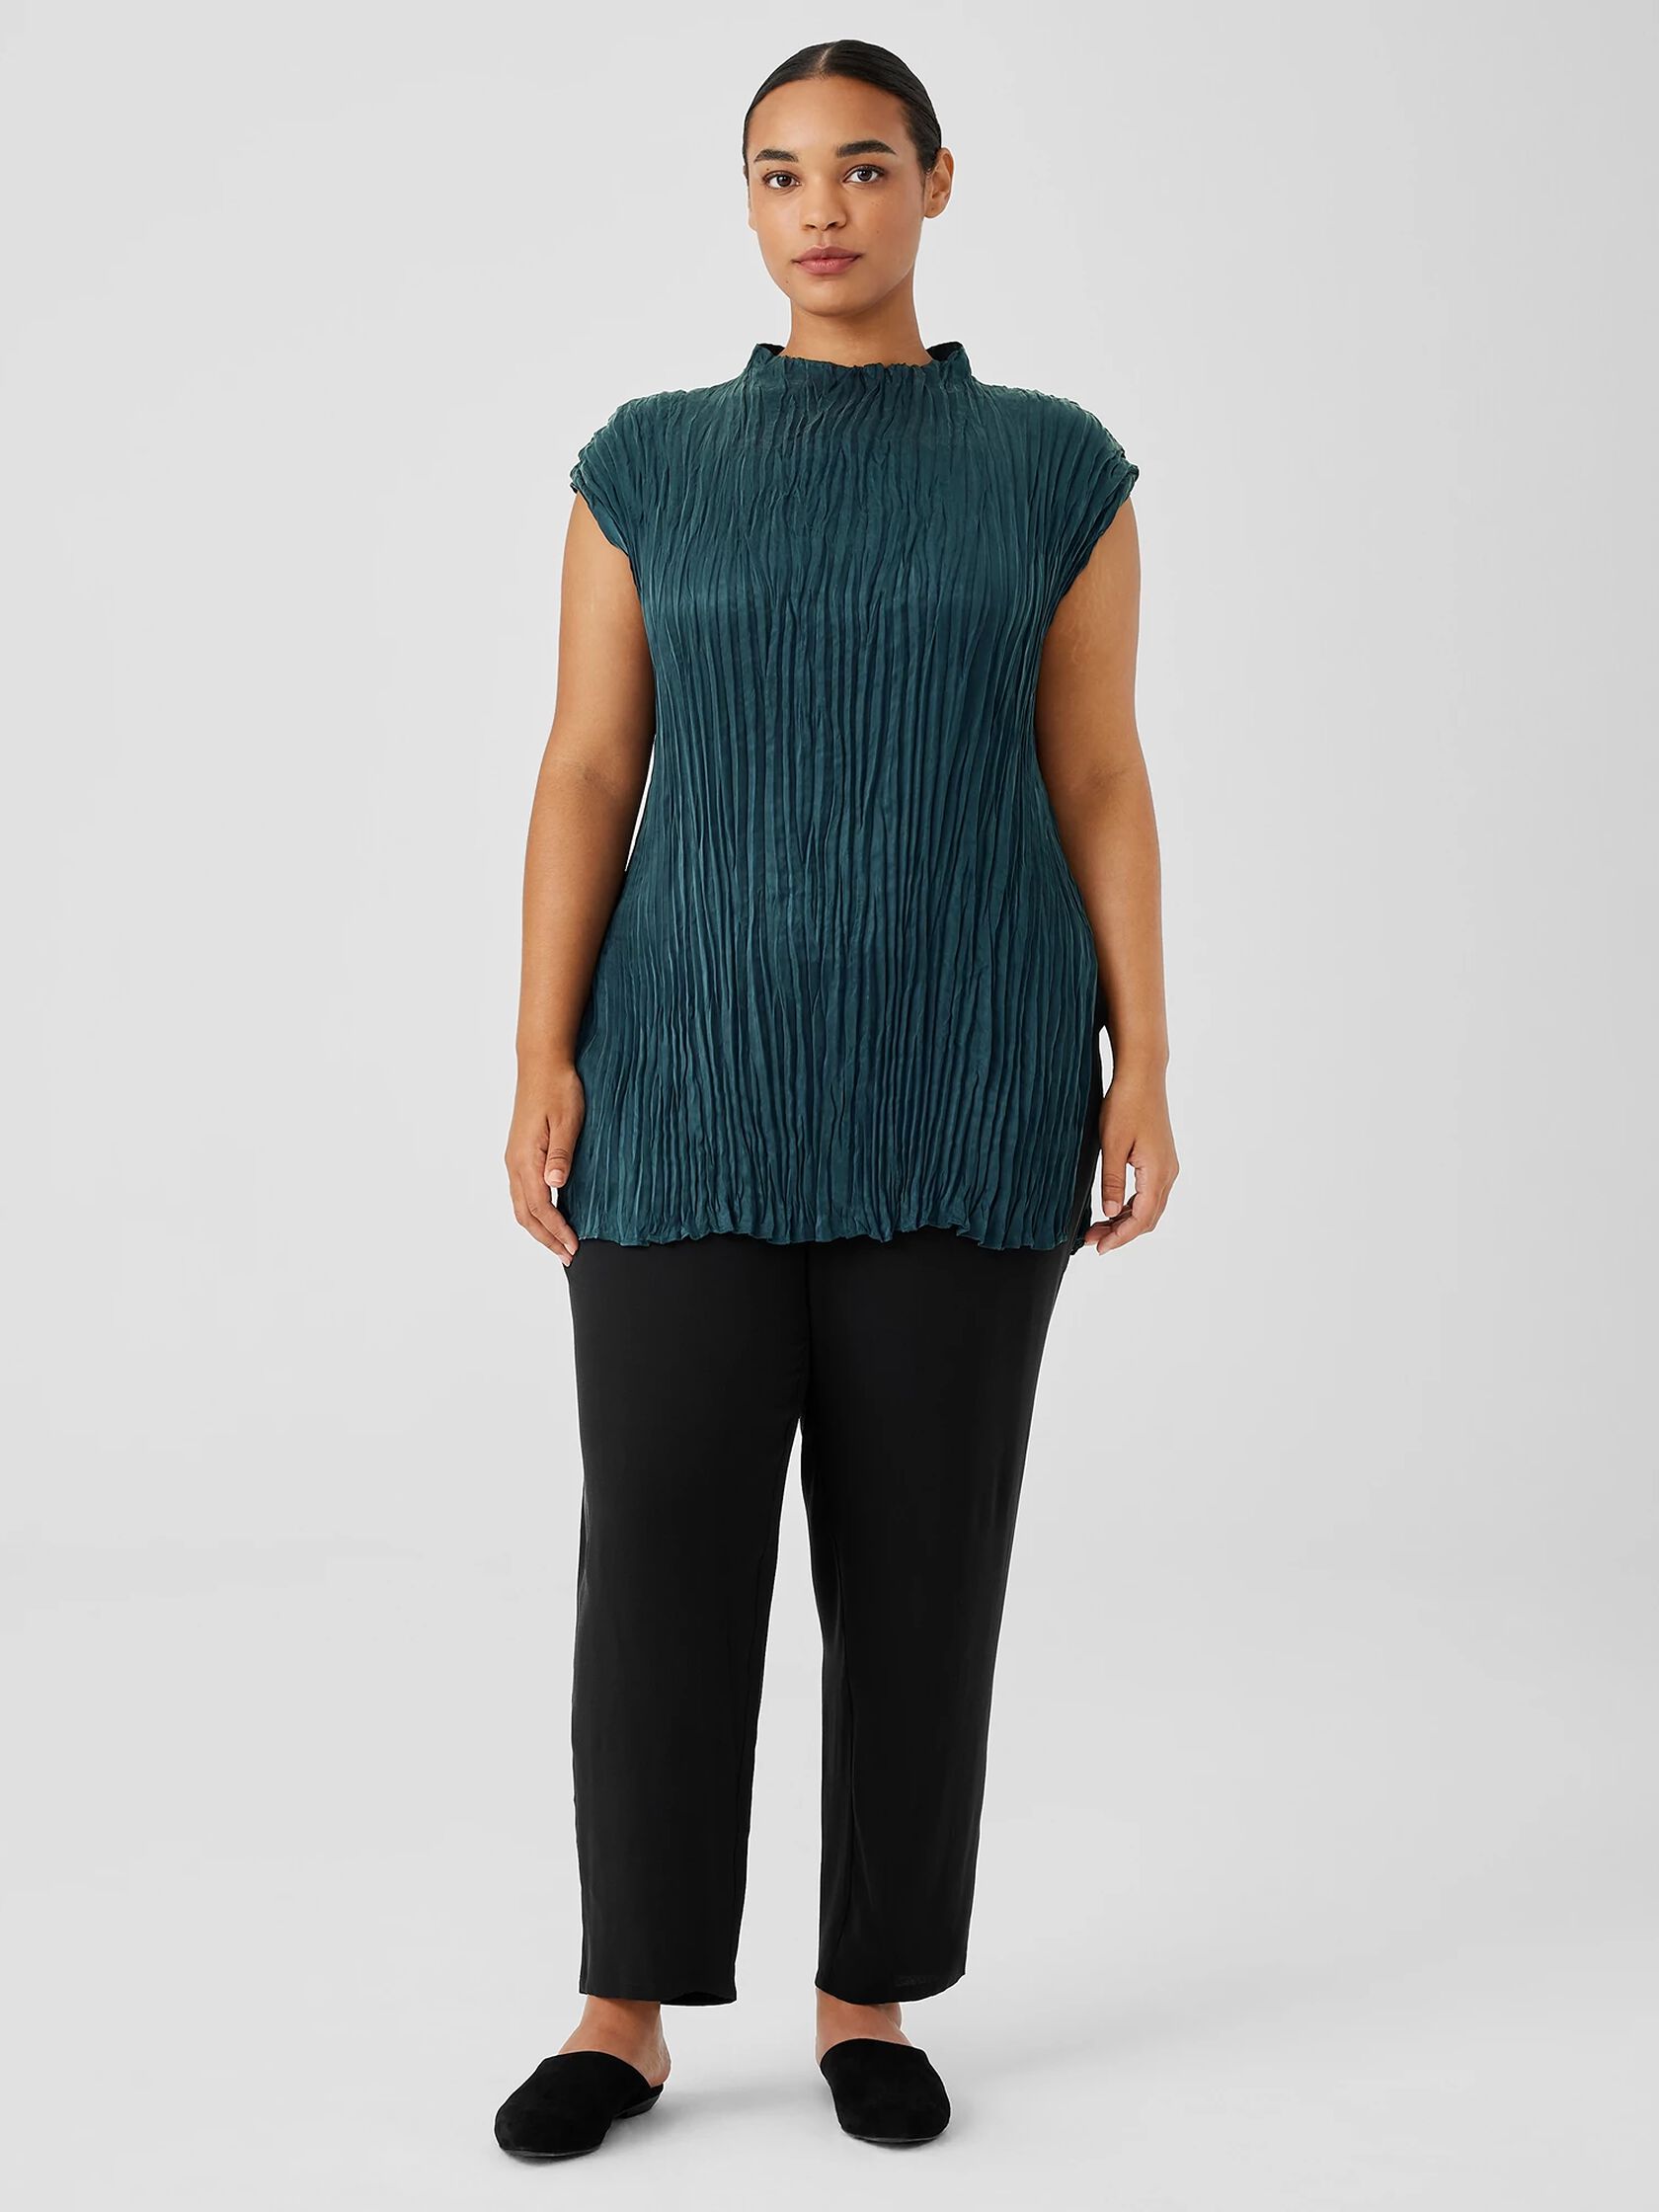 Crushed Cupro Funnel Neck Long Top